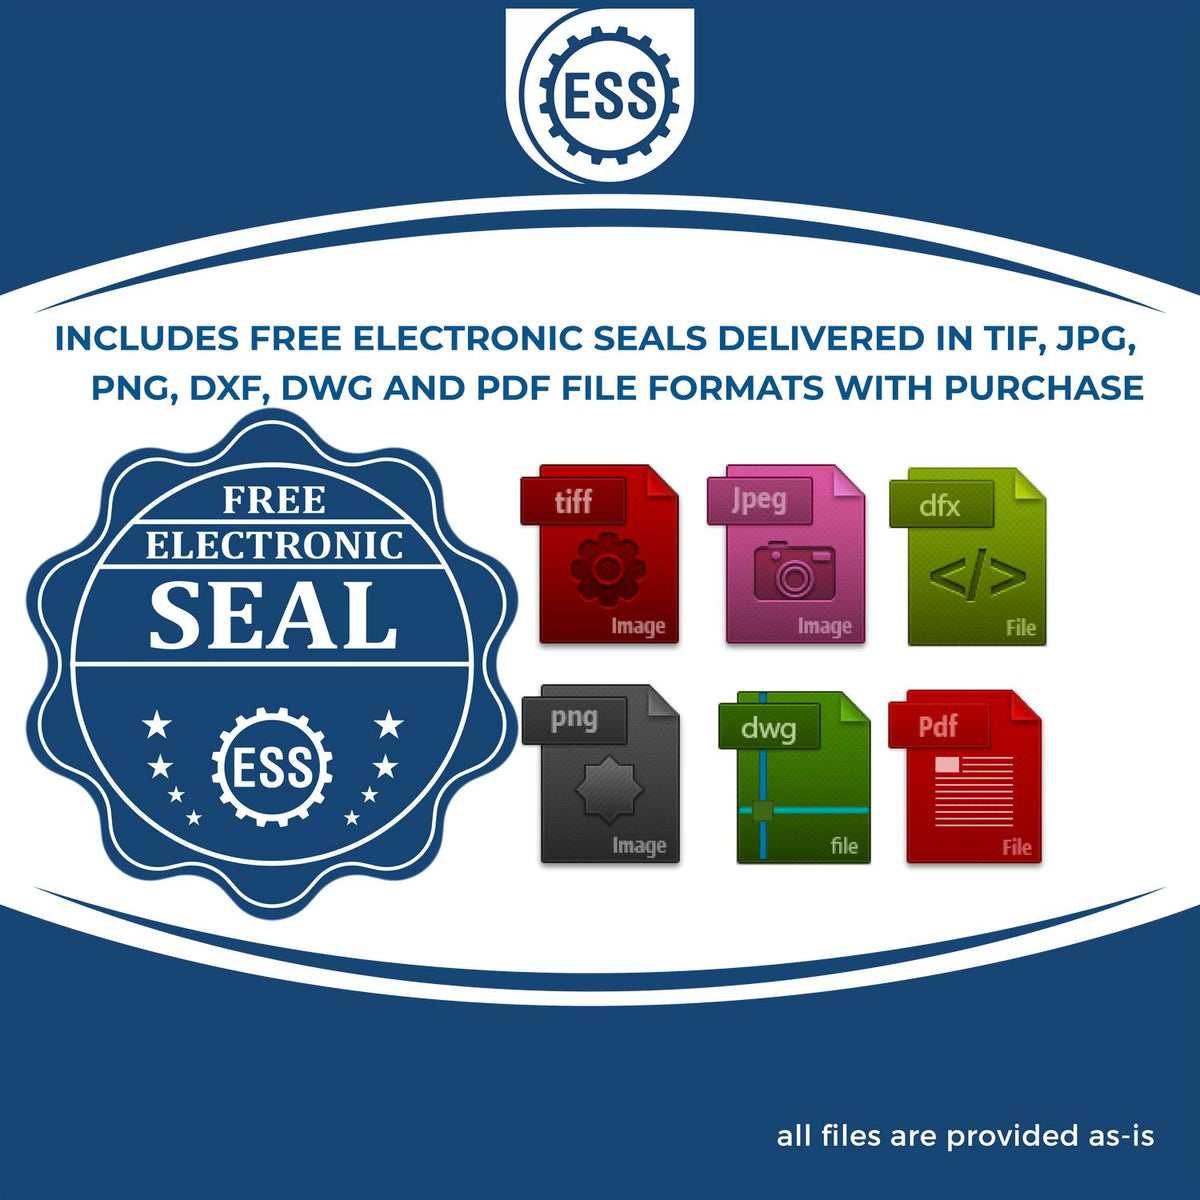 An infographic for the free electronic seal for the Hybrid Hawaii Architect Seal illustrating the different file type icons such as DXF, DWG, TIF, JPG and PNG.